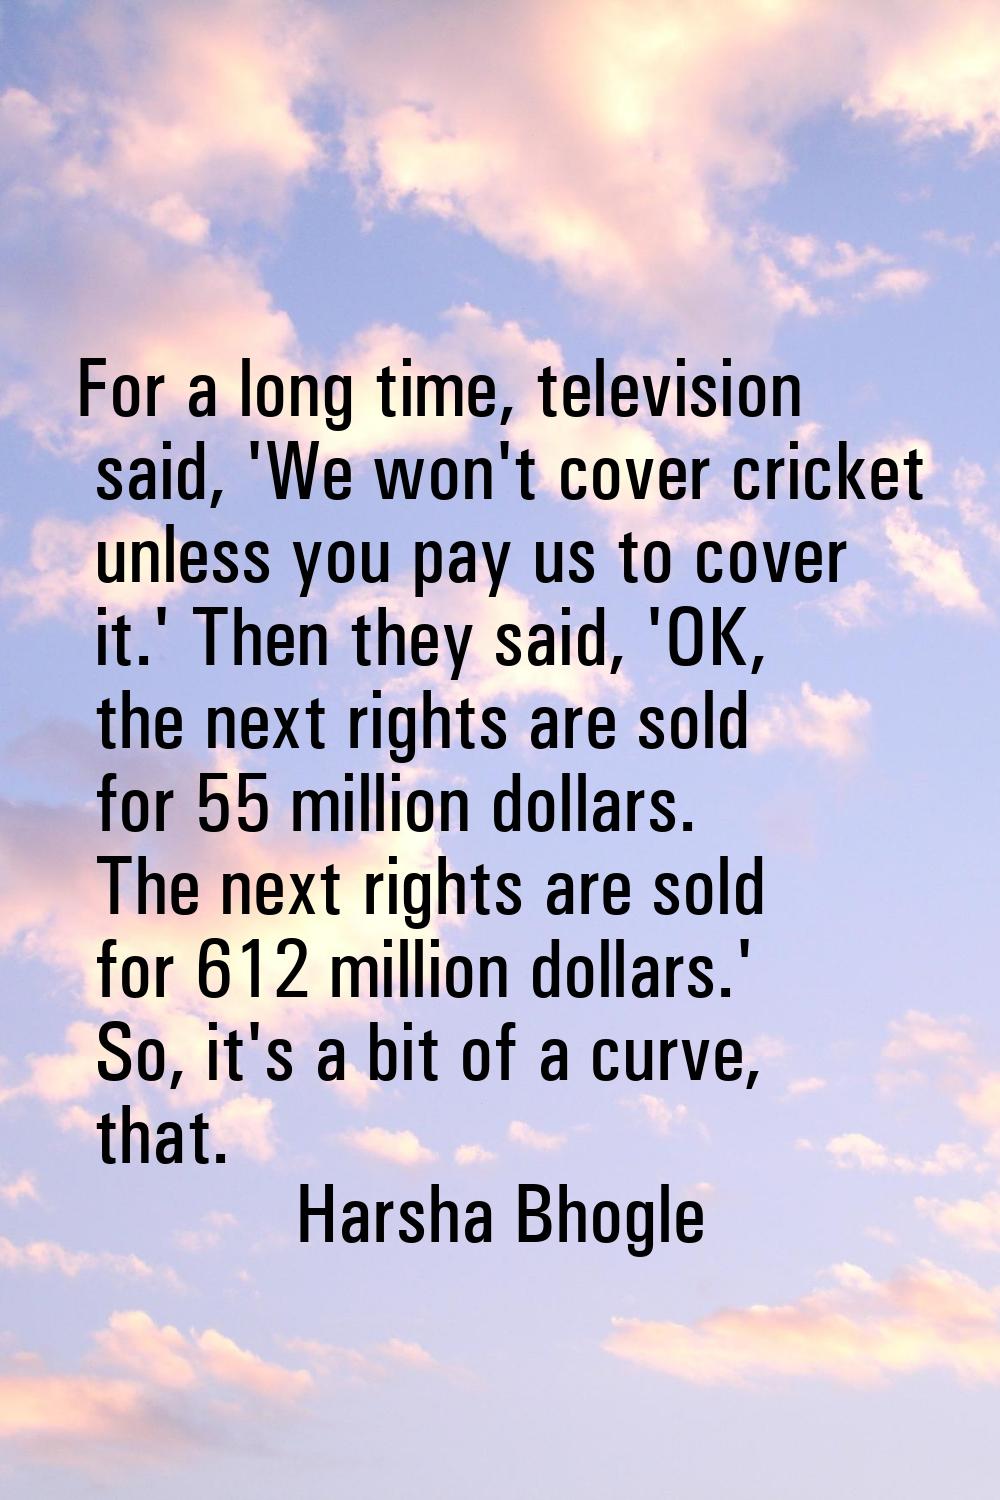 For a long time, television said, 'We won't cover cricket unless you pay us to cover it.' Then they